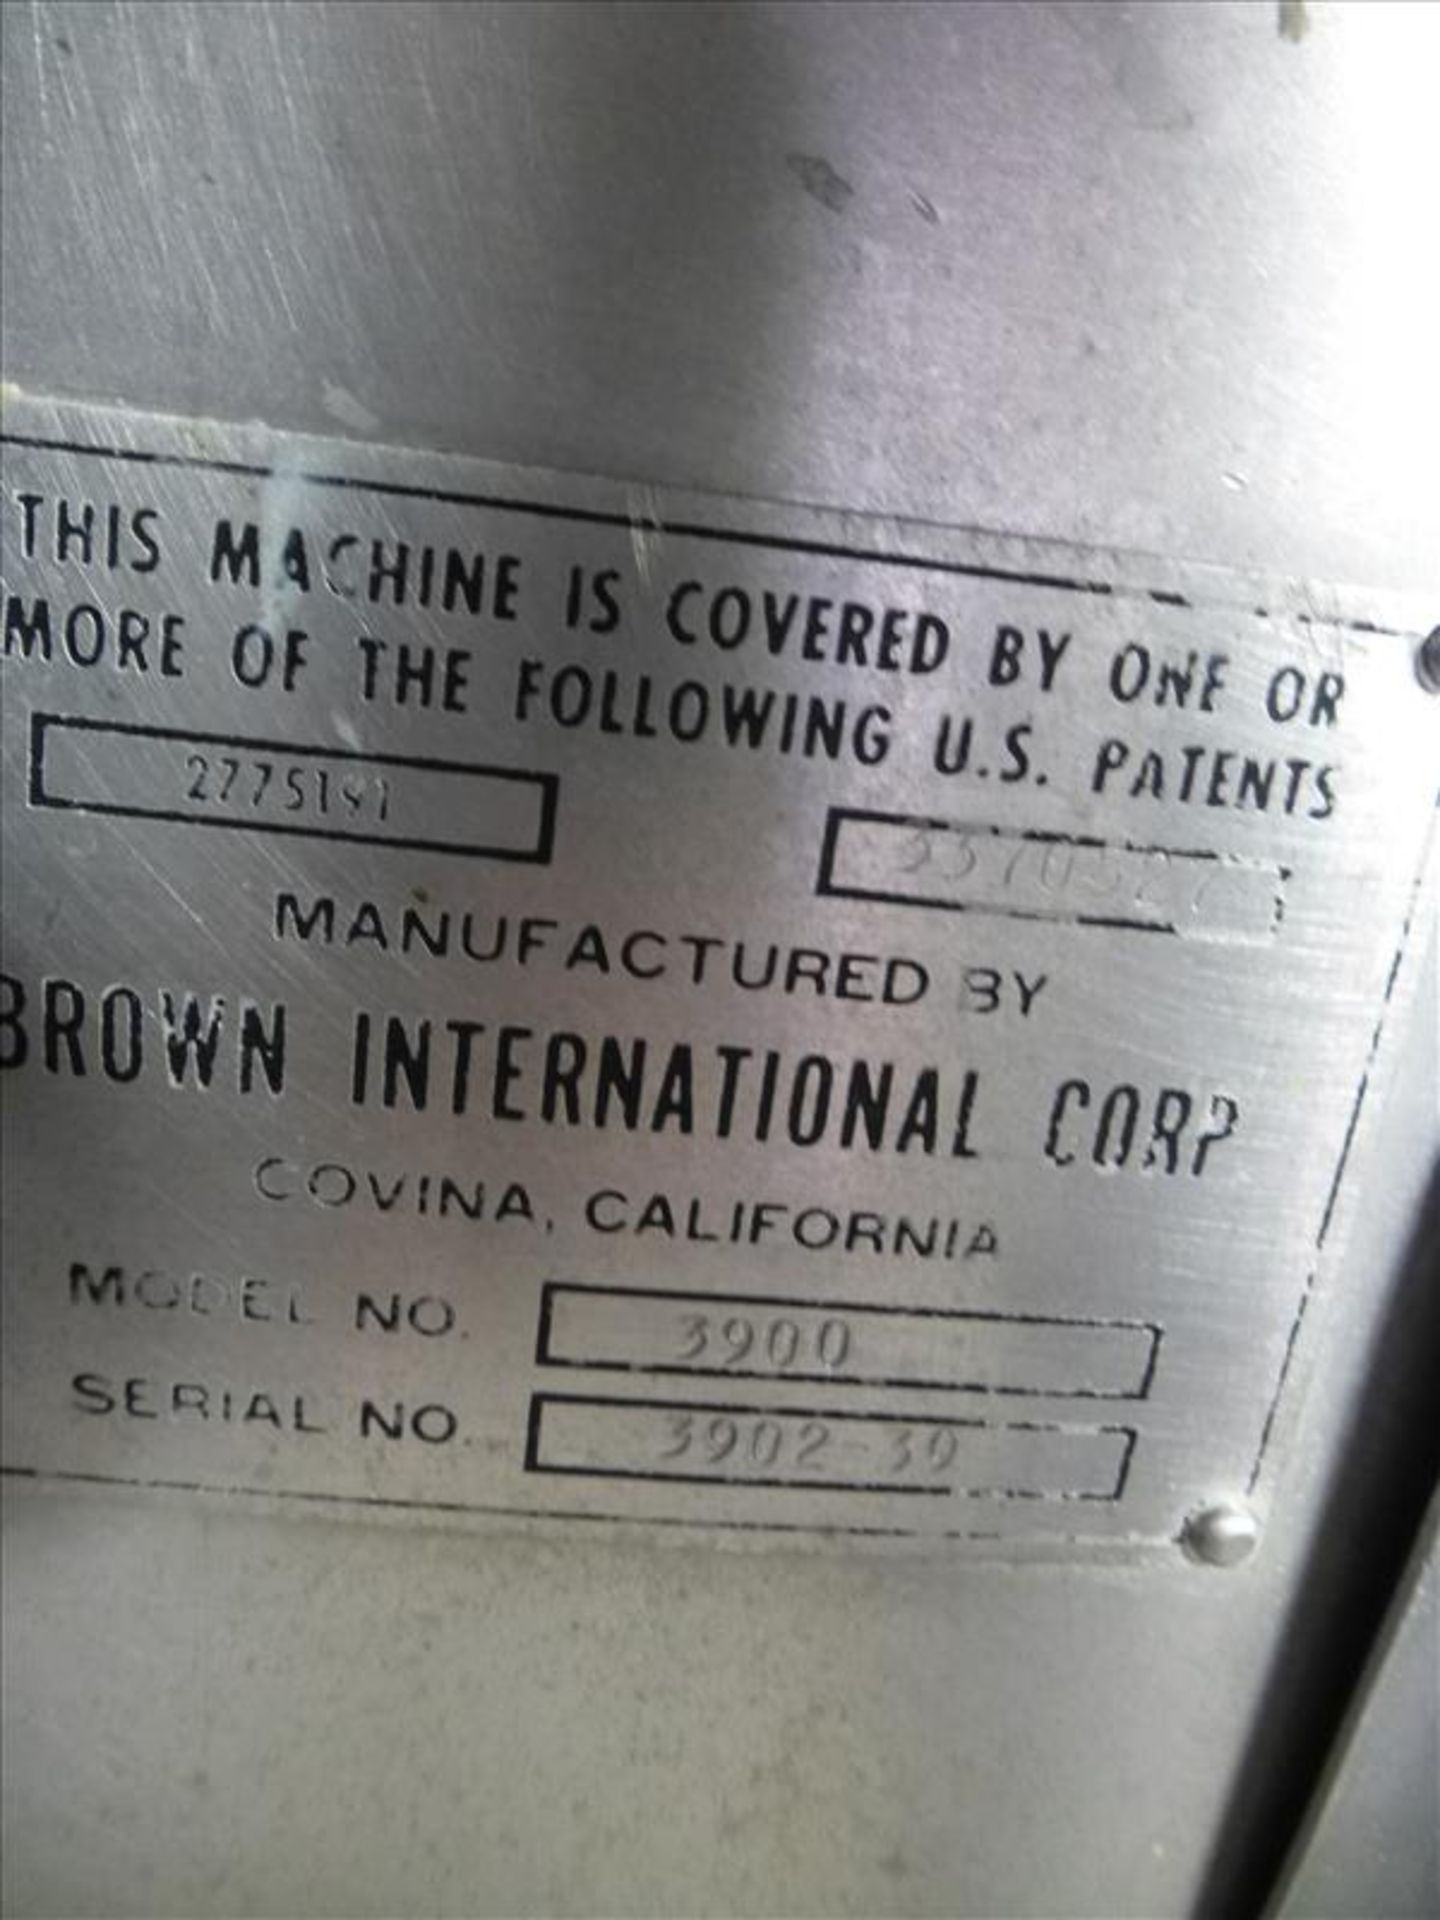 Brown International s/s finisher, paddle format, mod. 3900, ser. no. 3902-39, 15 h.p. c/w (1) - Image 5 of 7